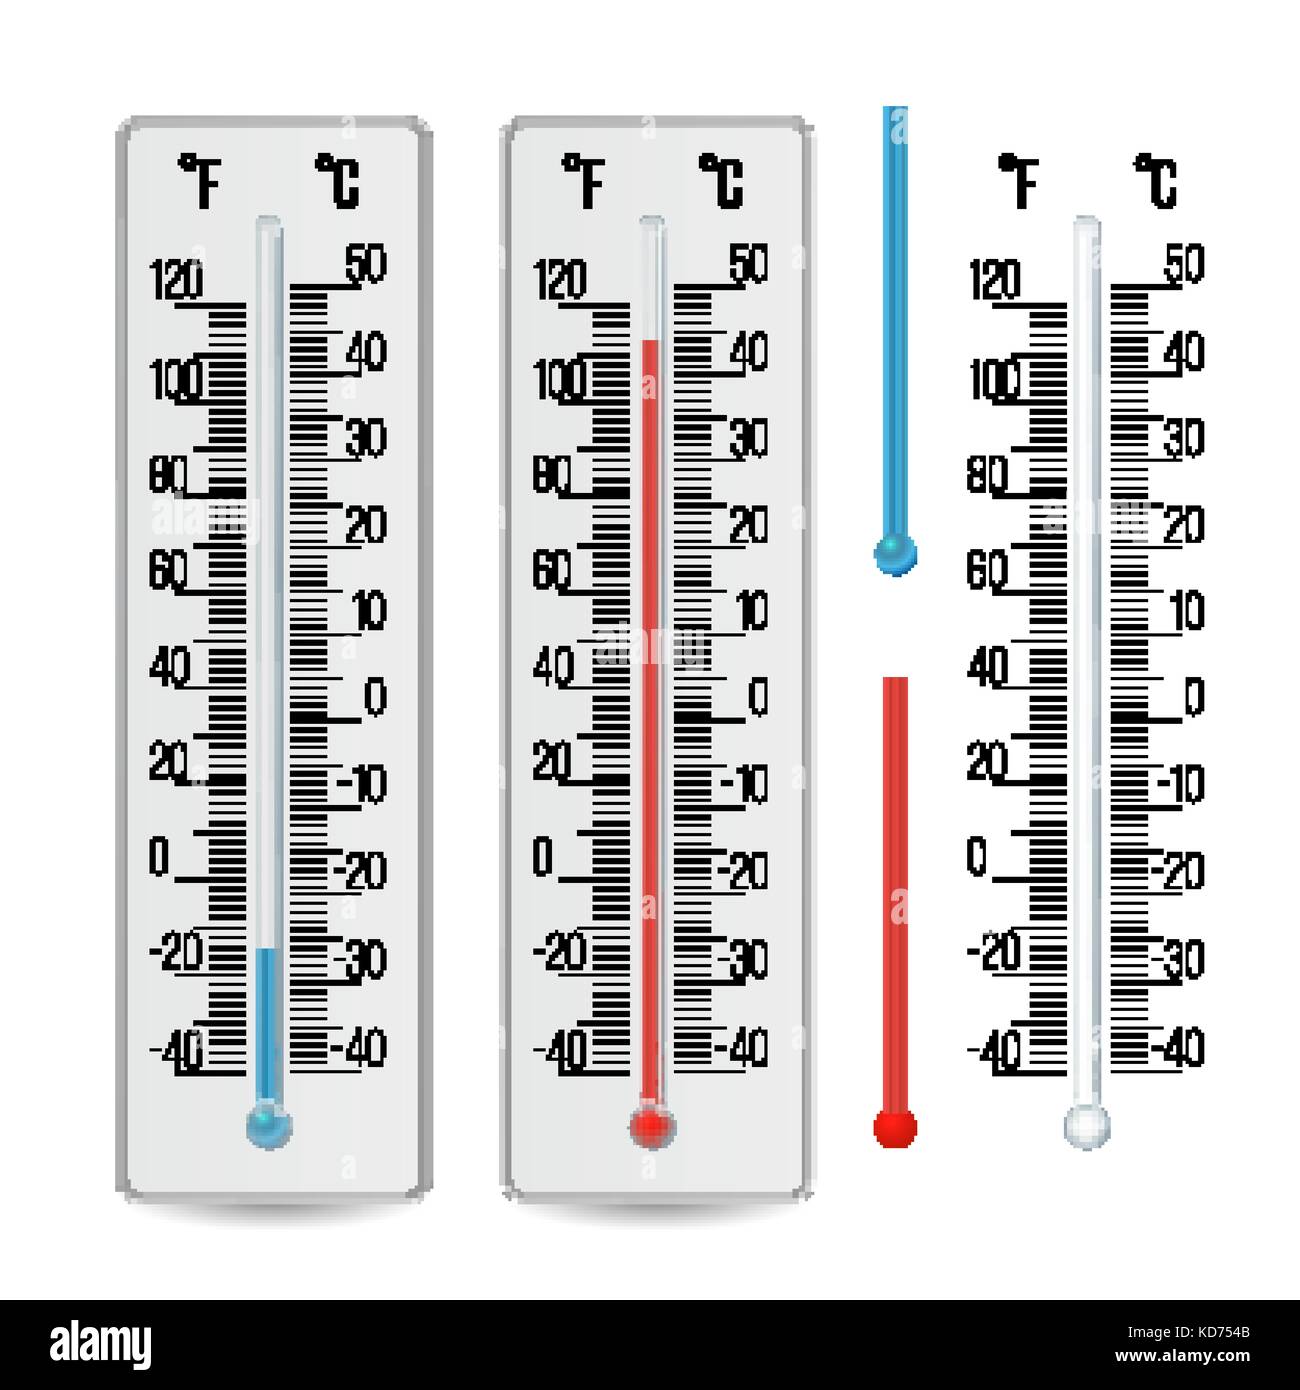 https://c8.alamy.com/comp/KD754B/thermometer-vector-outdoor-indoor-alcohol-thermometers-set-isolated-KD754B.jpg